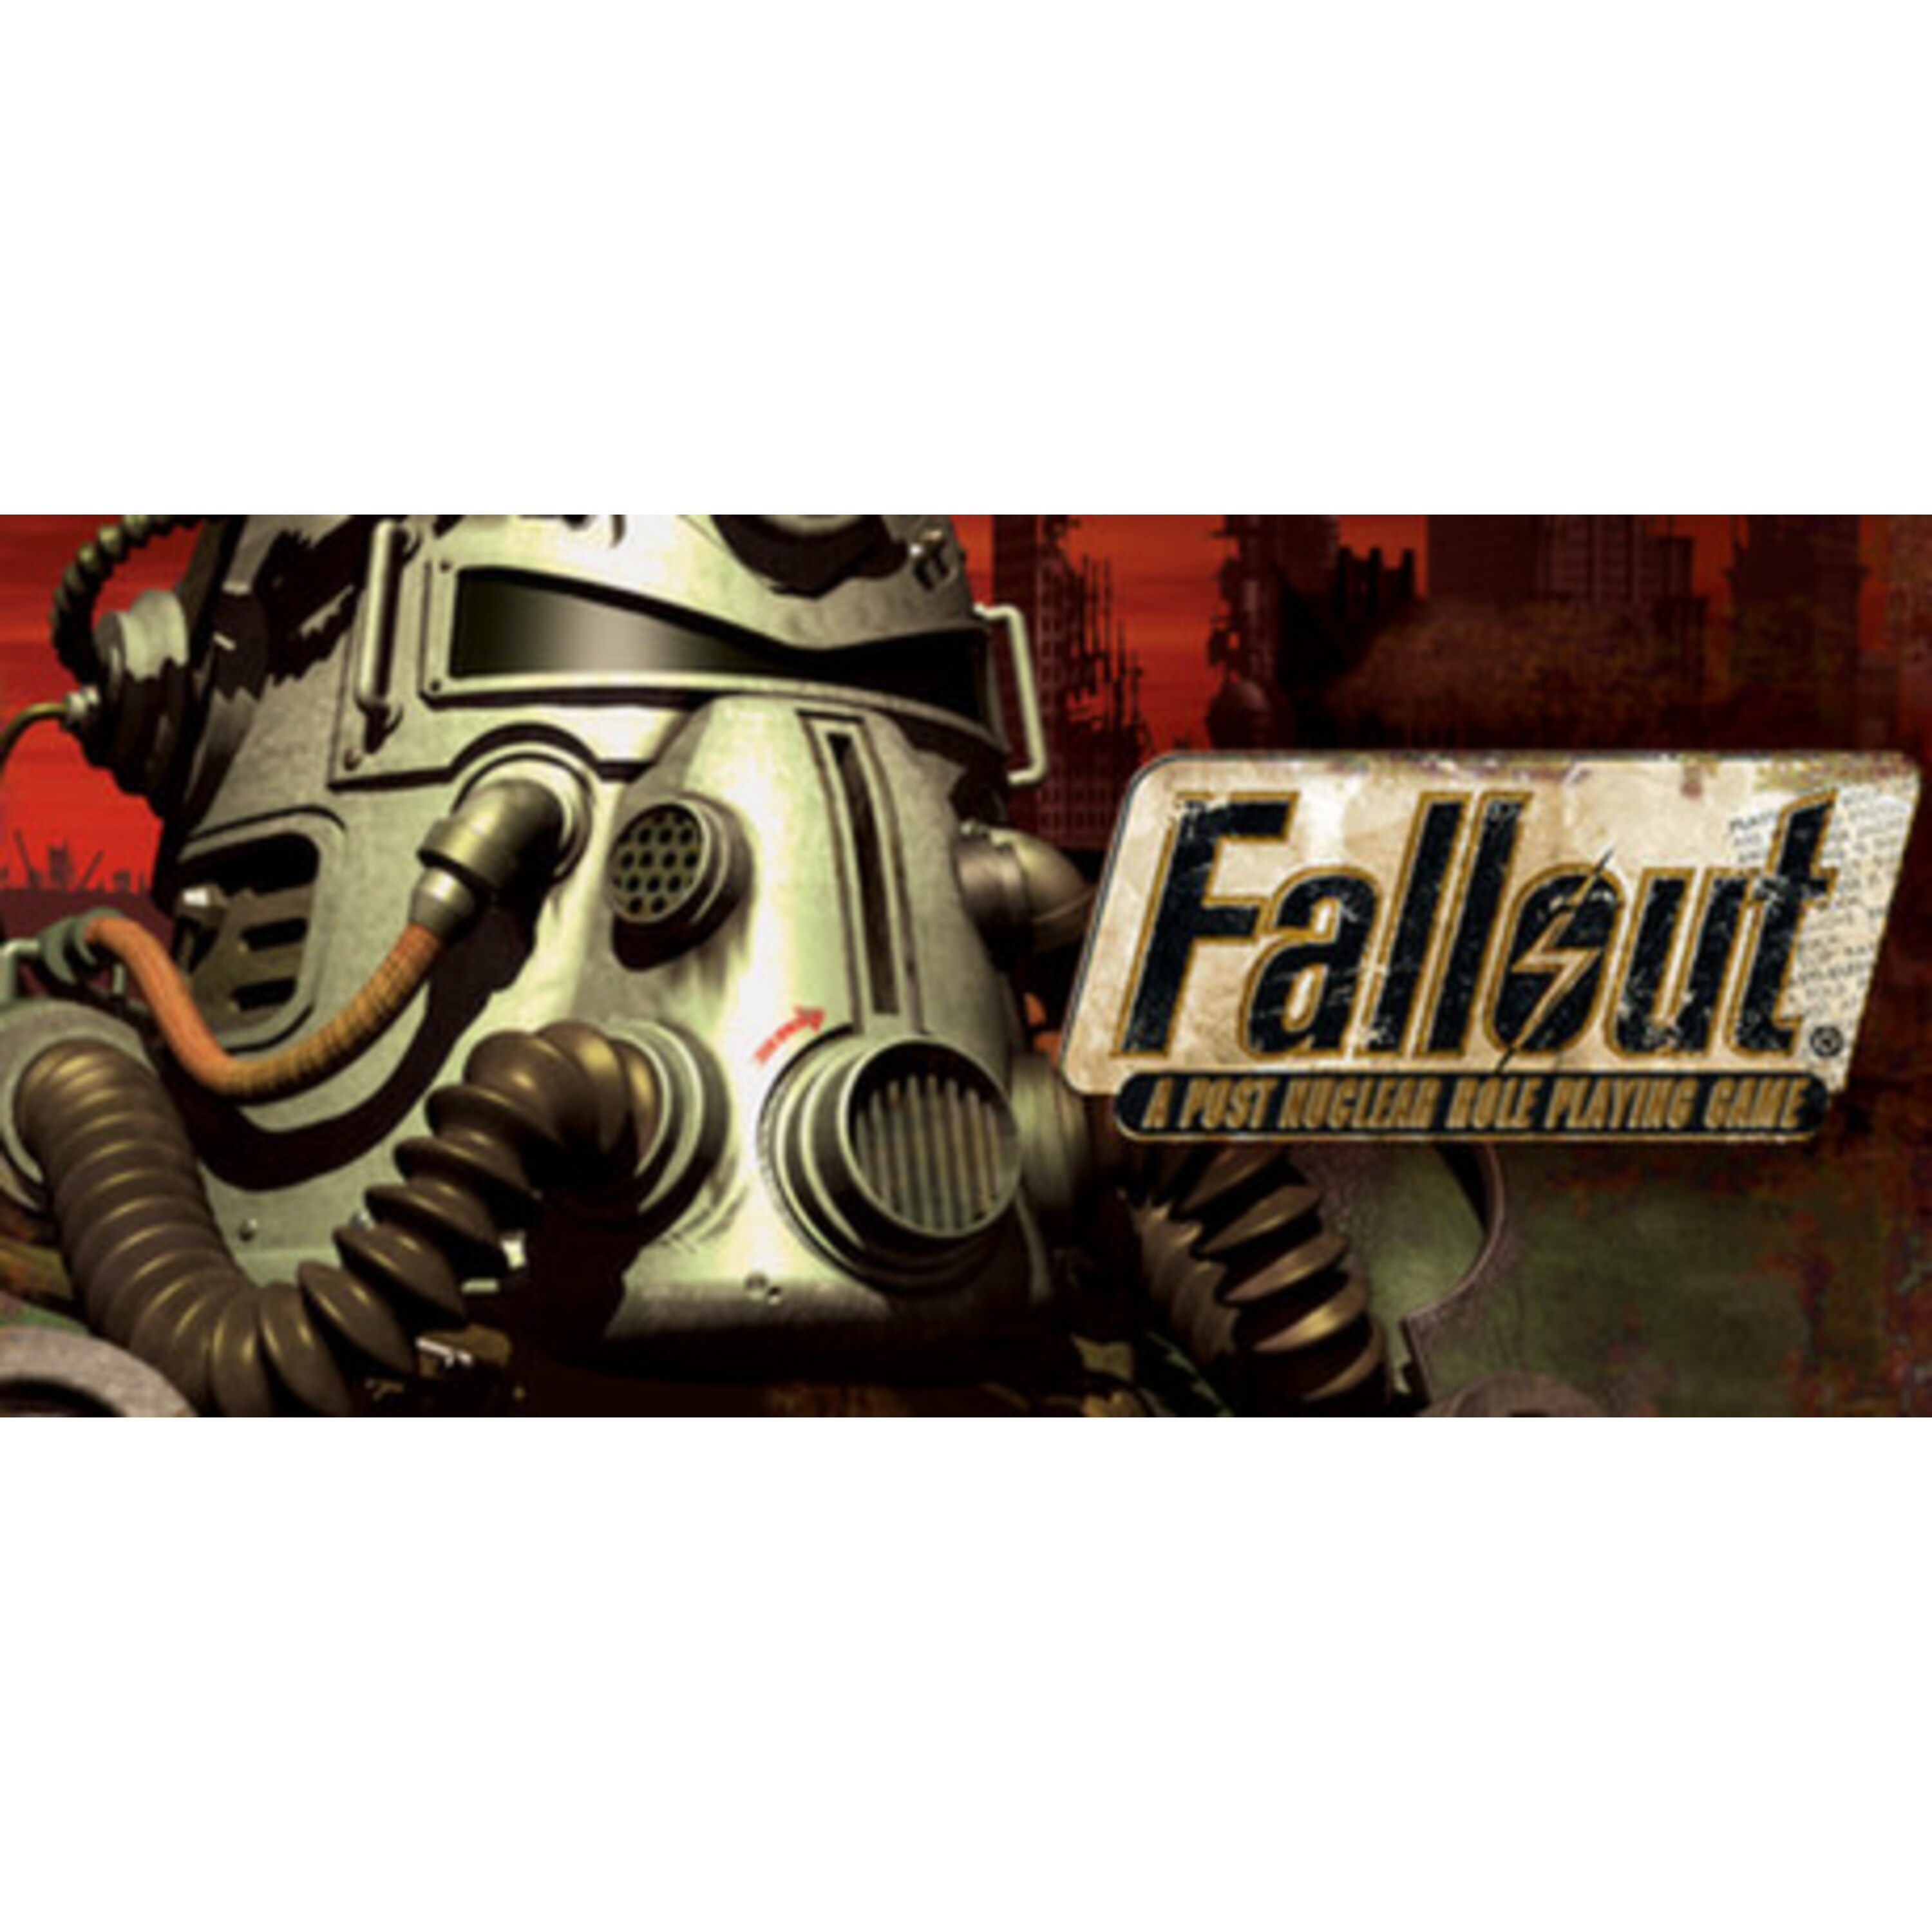 Fallout: A Post Nuclear Role Playing Game for windows download